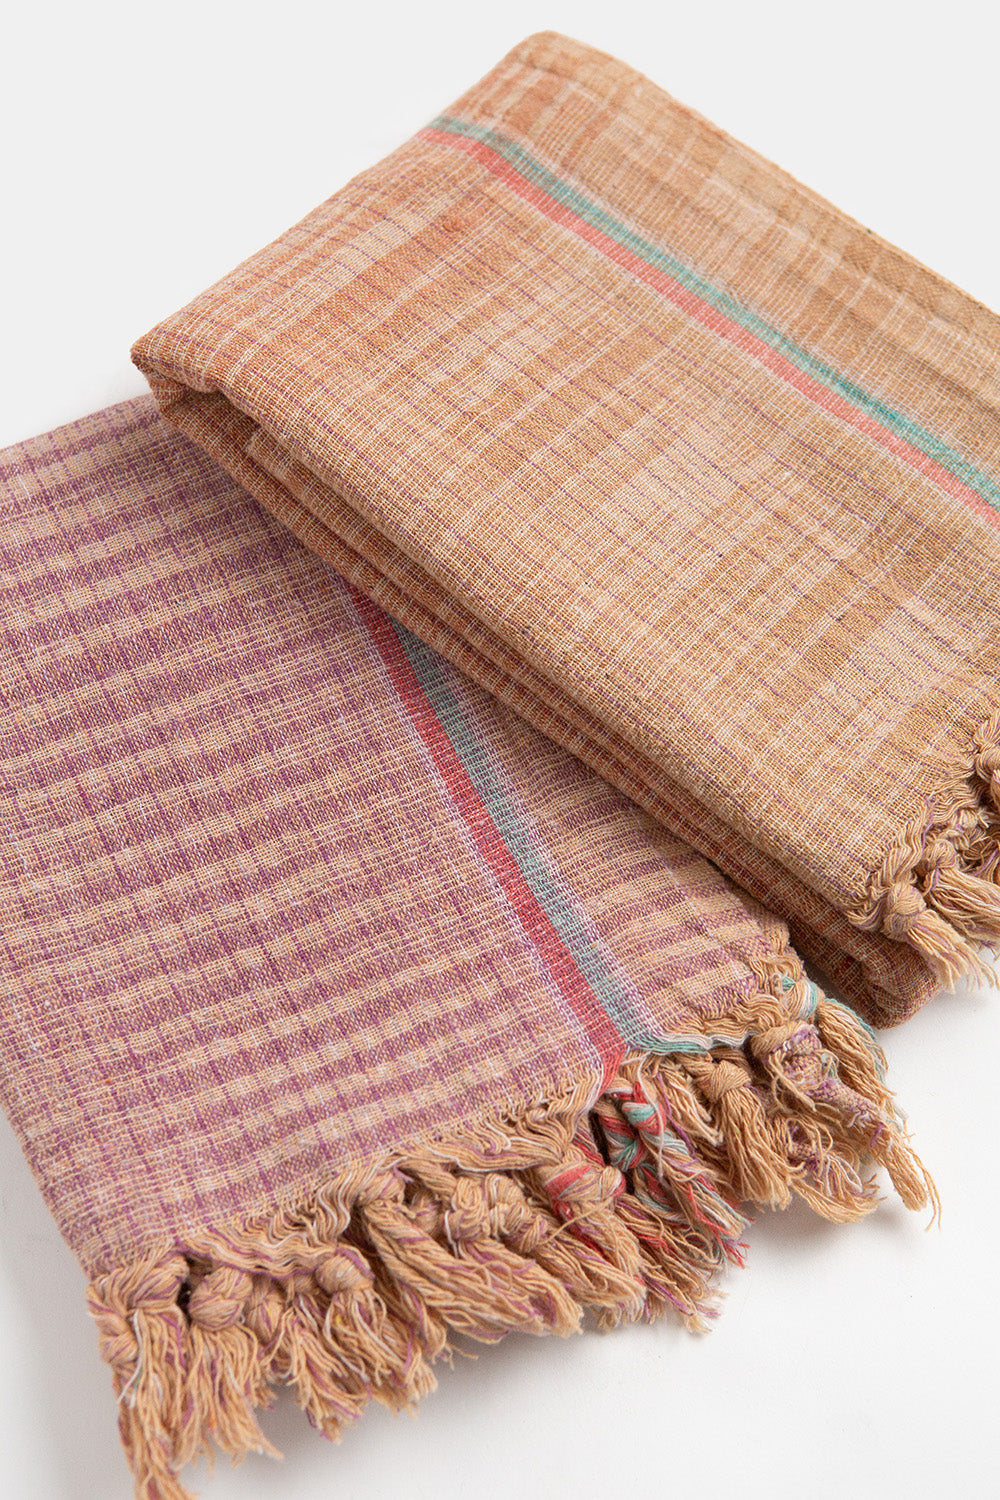 Khadi Cotton Towel in Curry